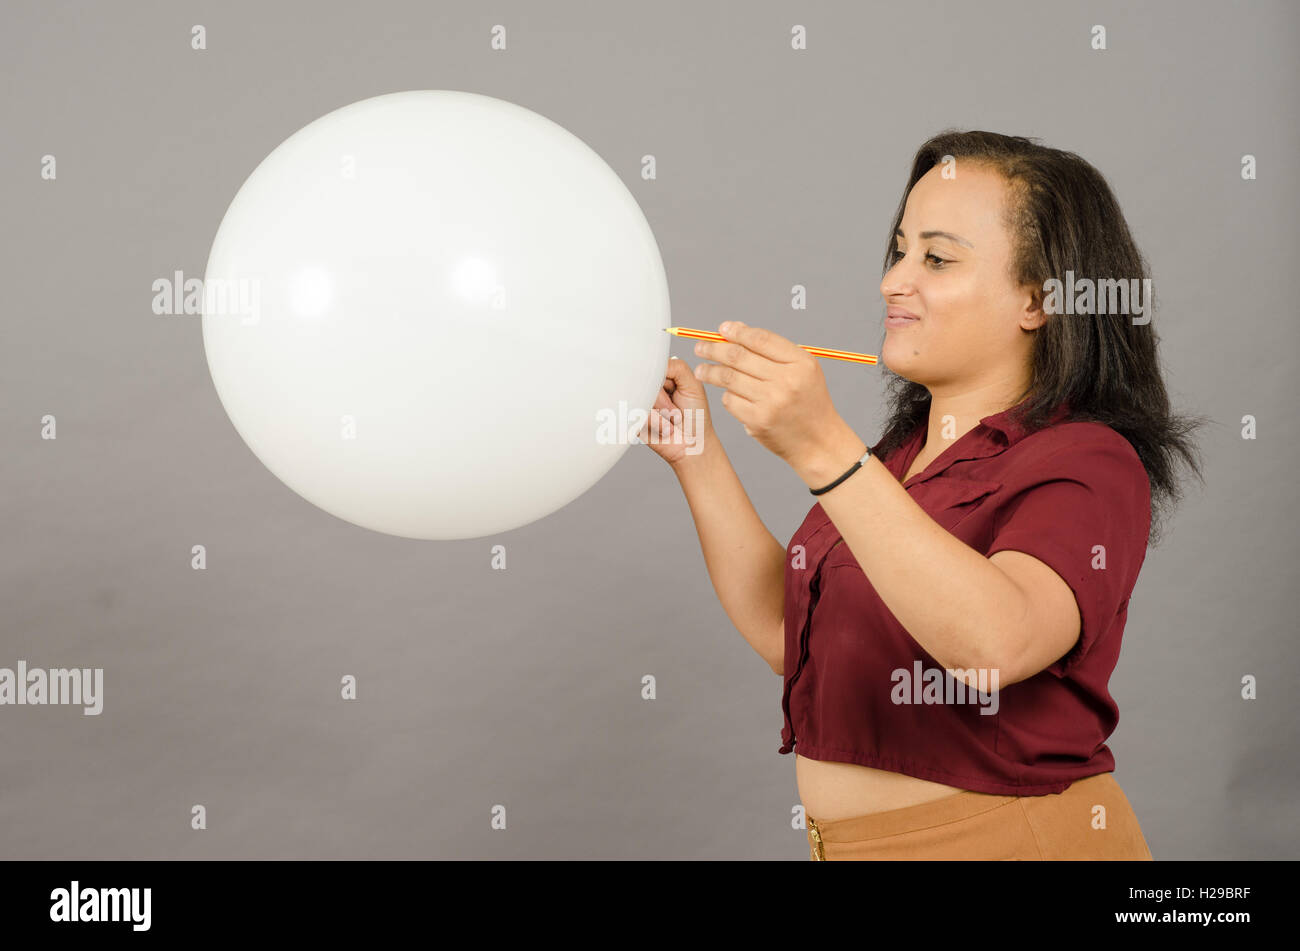 Adult woman bursting a big white balloon with a pencil. Stock Photo